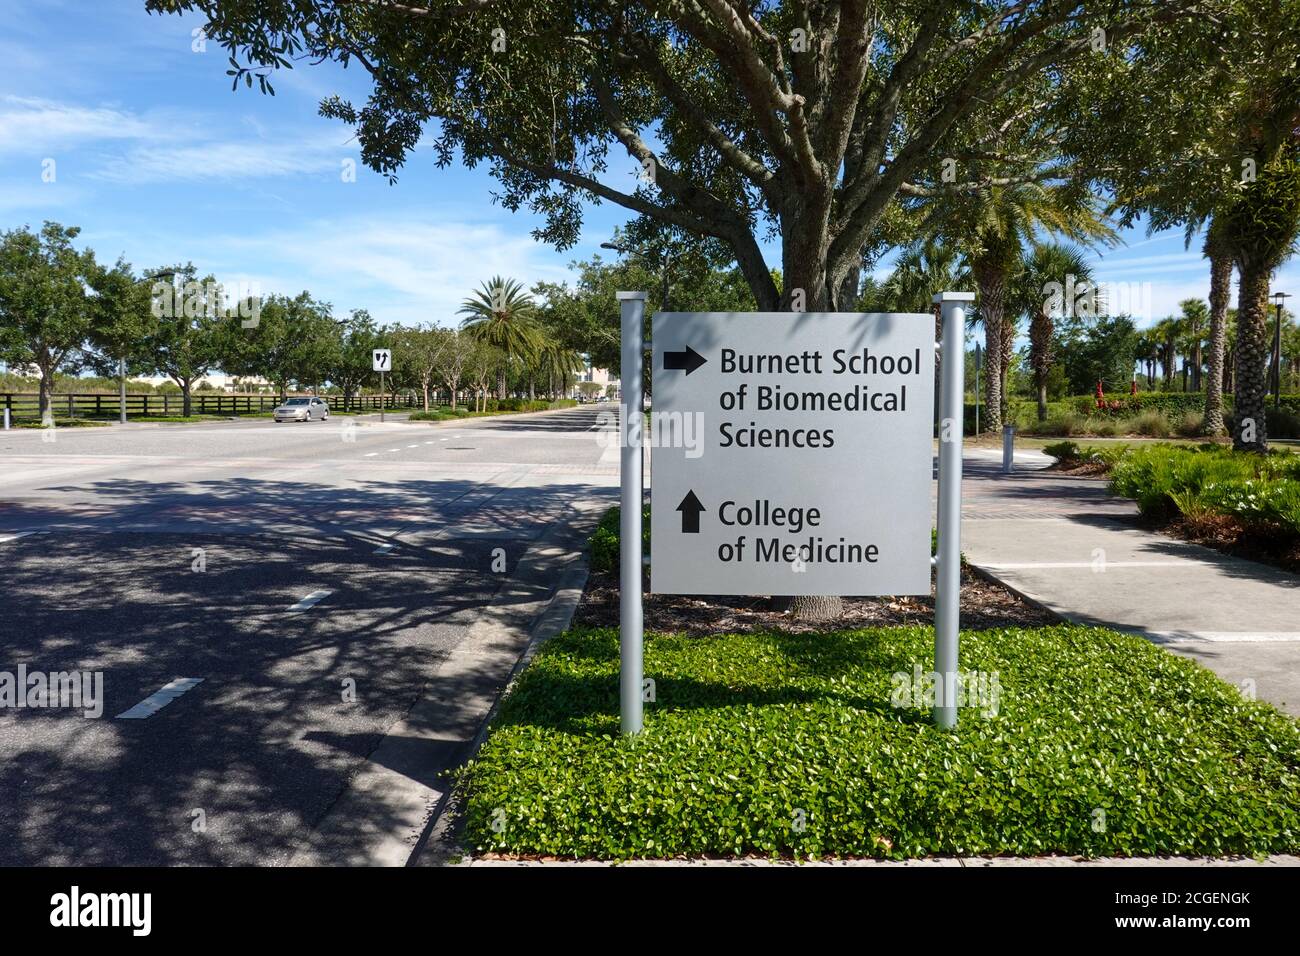 Orlando,FL/USA -5/7/20:  The directional sign pointing to Burnett School of Biomedical Sciences and the College of Medicine at the University of Centr Stock Photo